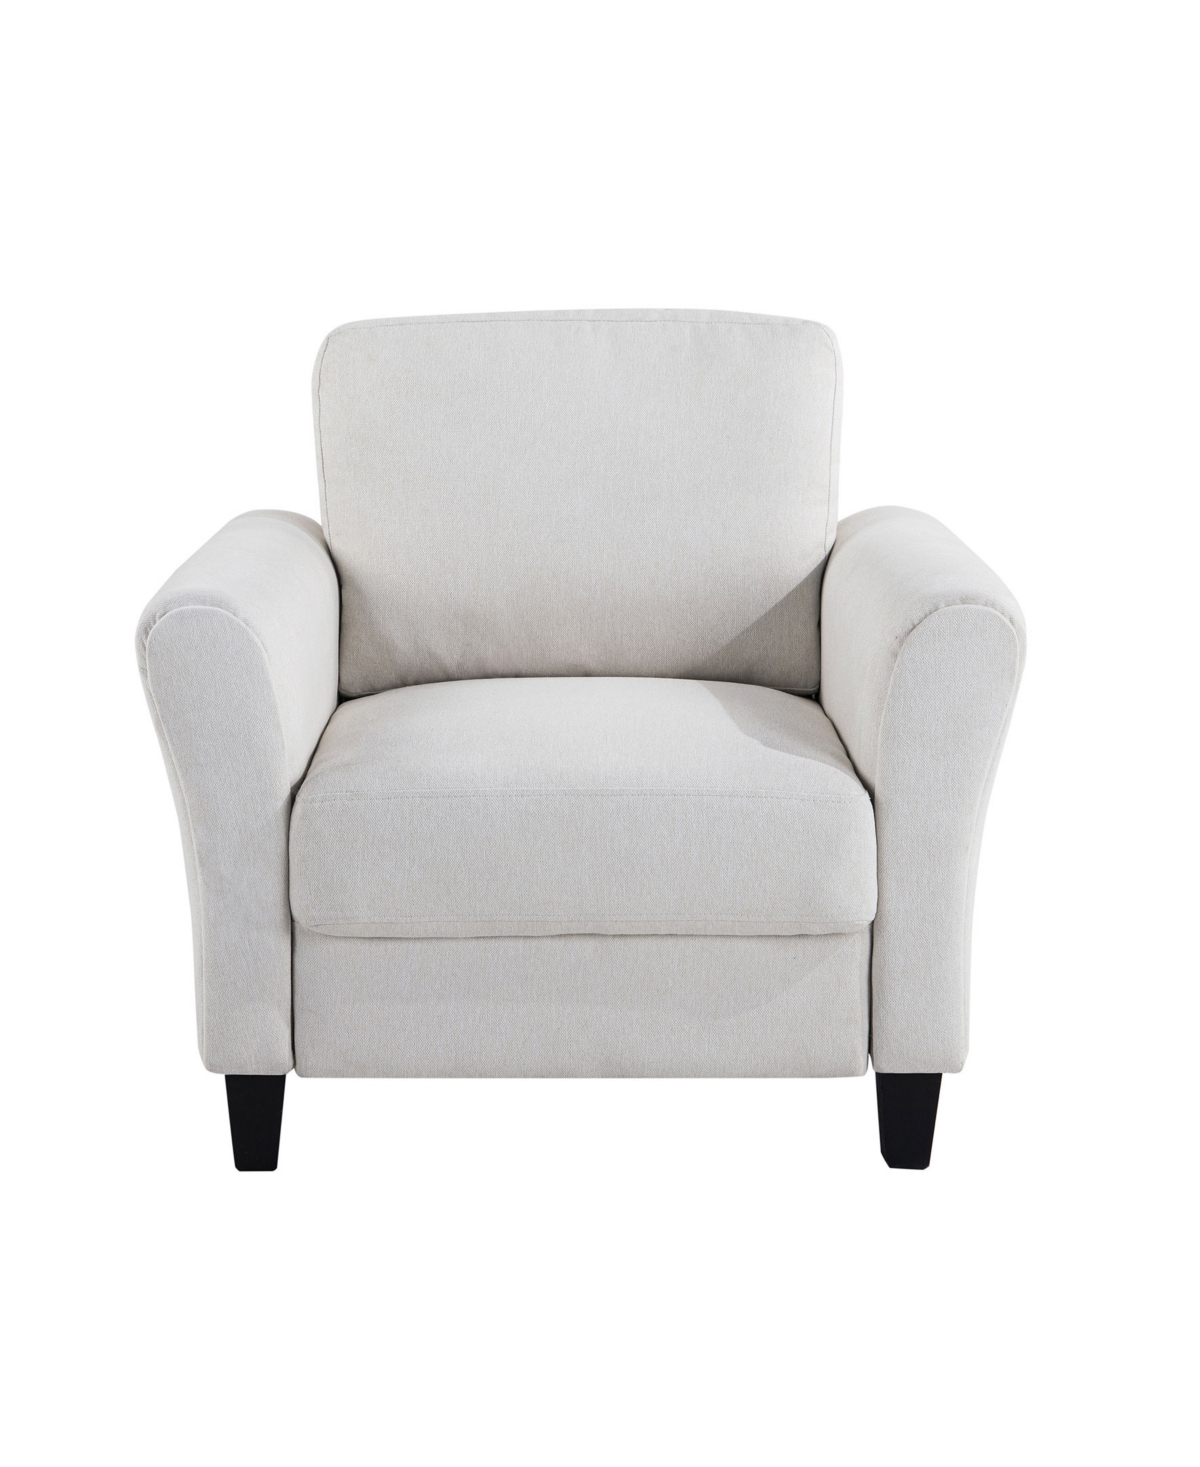 Lifestyle Solutions 35.4" Microfiber Wilshire Chair With Rolled Arms In Oyster